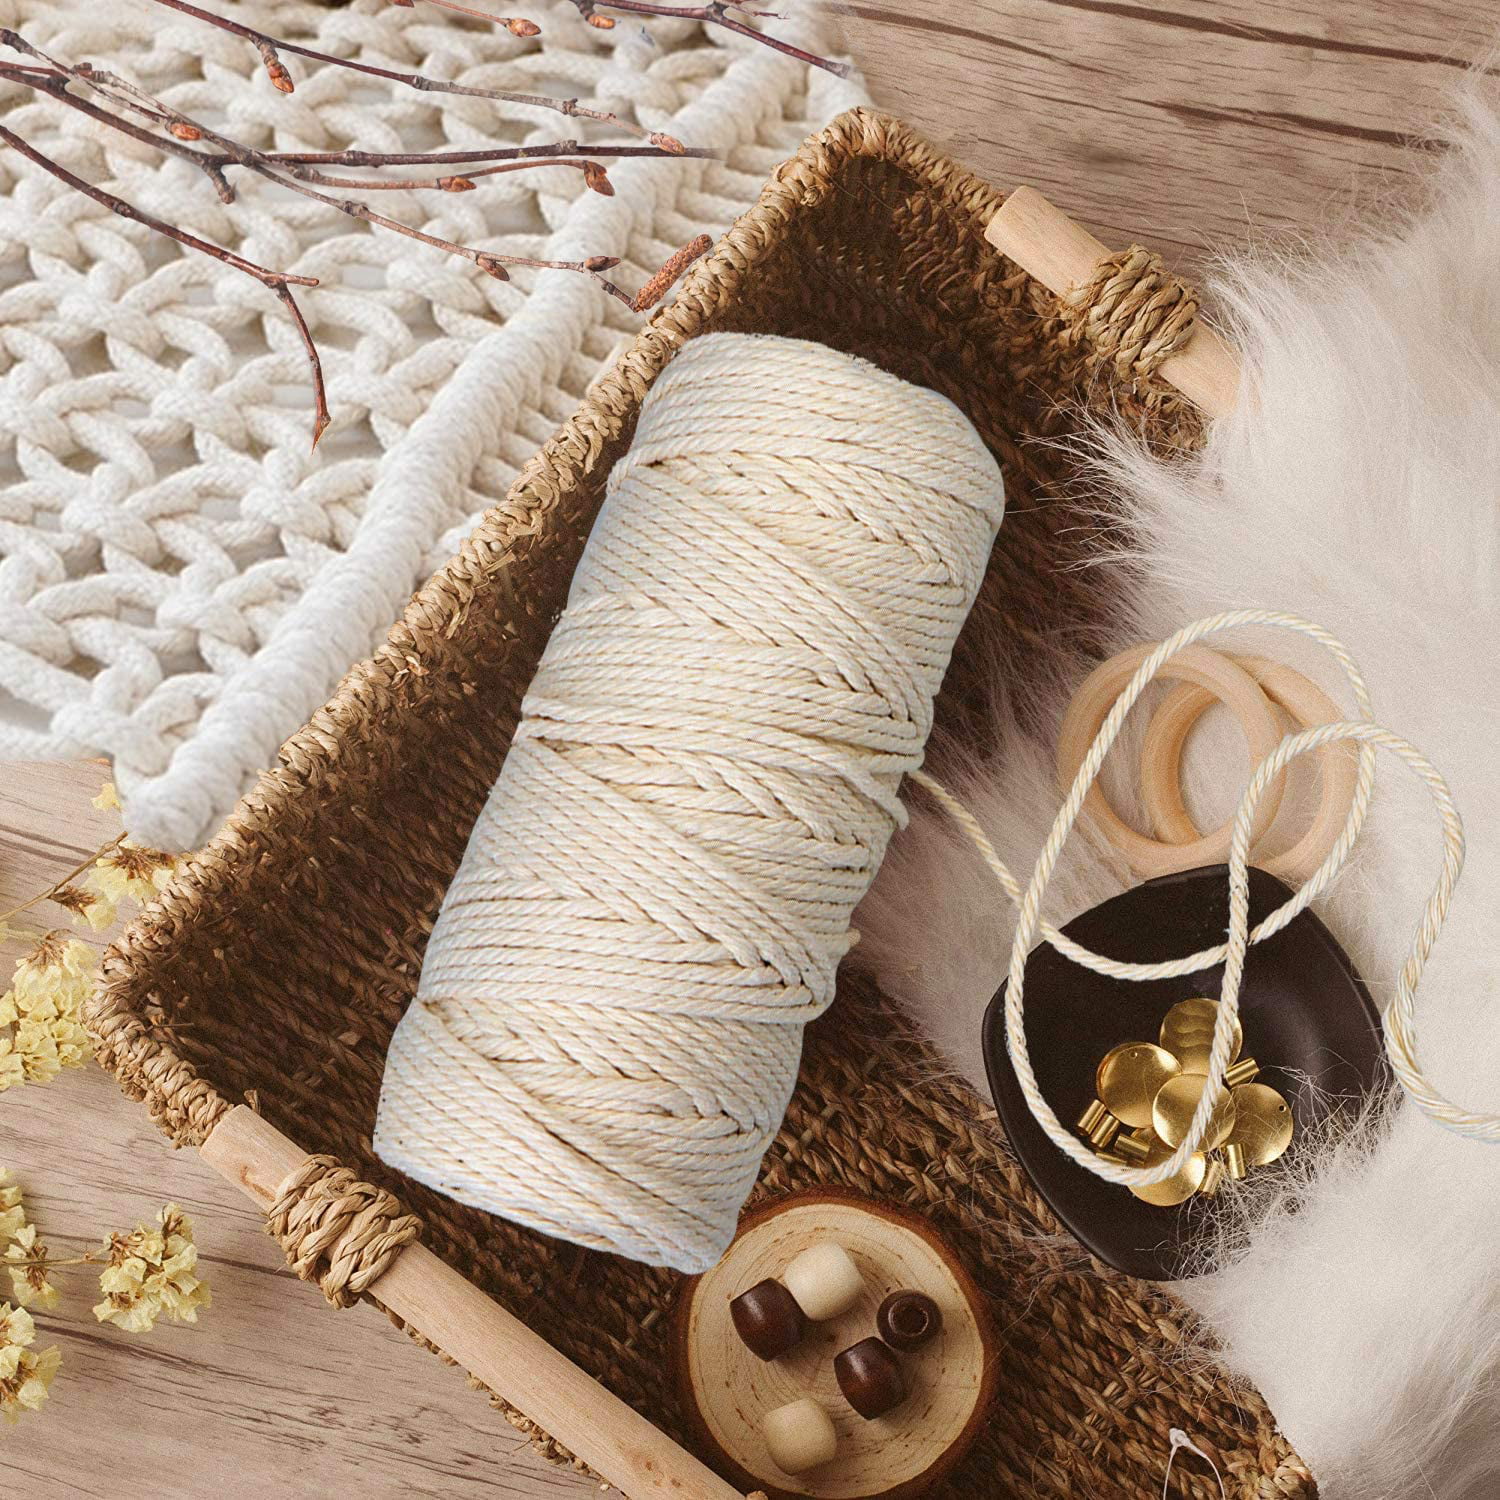 6mmx20m Braided Cotton Rope Macrame Rope Clotheslines DIY Wedding Decor  Craft Cord Camping Tying Garden Accessories Outdoor - AliExpress